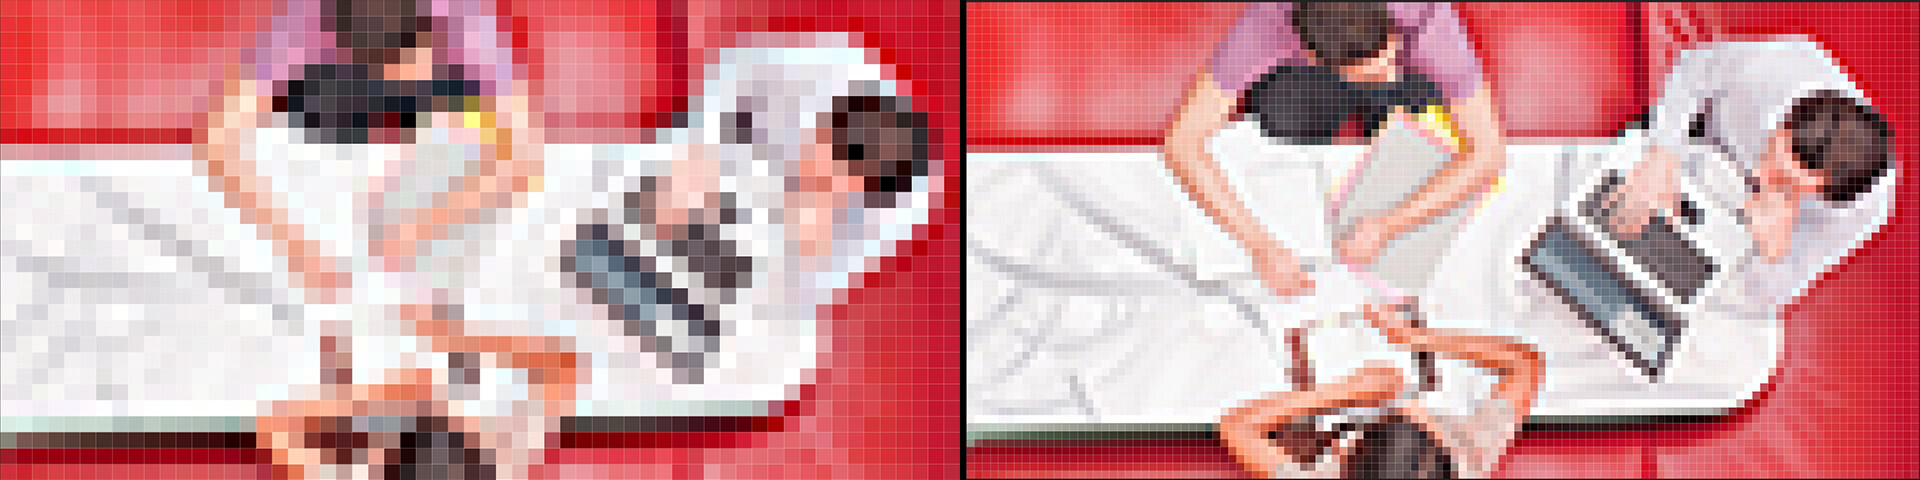 Side by side comparison of two images to show a difference in pixels